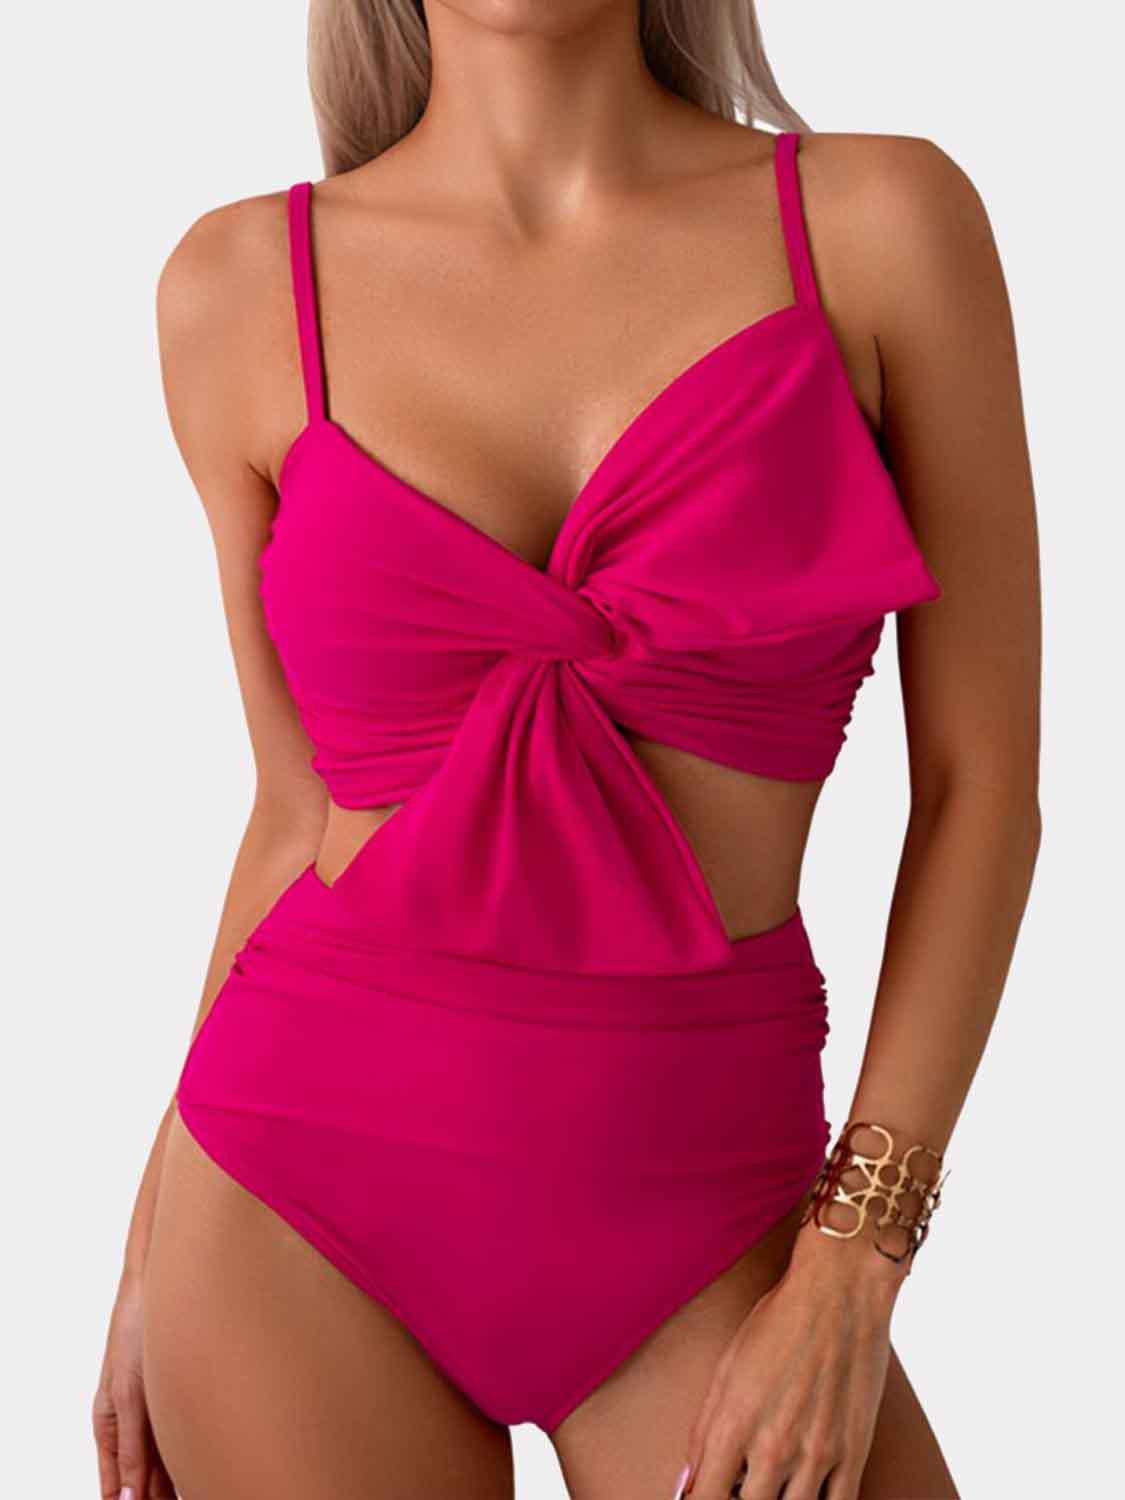 a woman in a pink one piece swimsuit